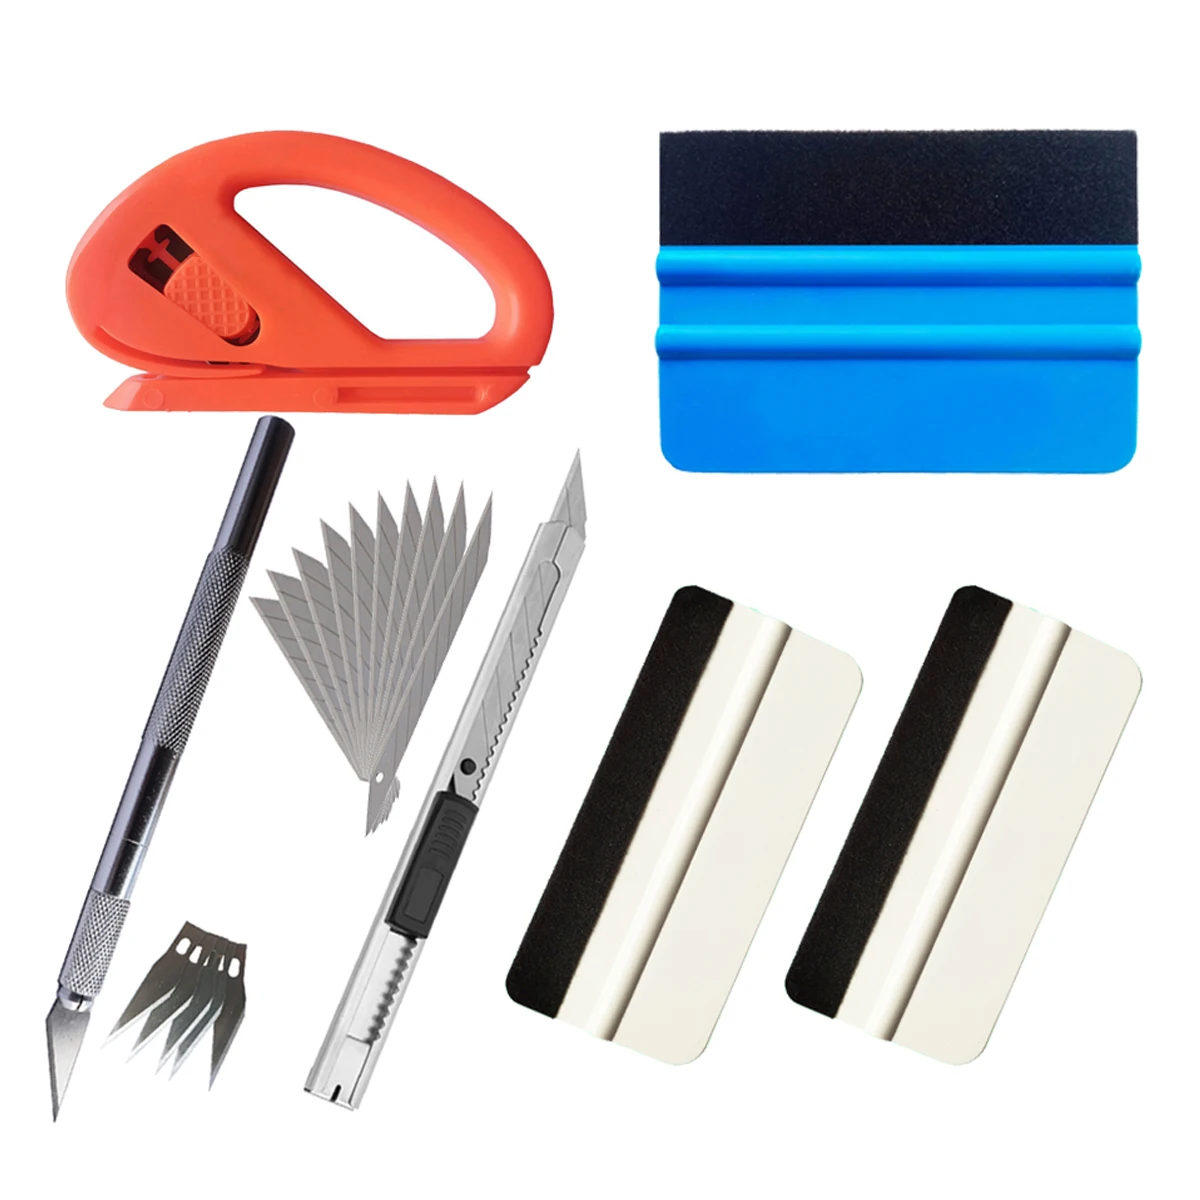 

Car Tint Squeegee Scraper Wrapping Tools Vehicle Vinyl Wrap Film Sticker Installation Kit Cutter Knife Auto Car Accessories T01